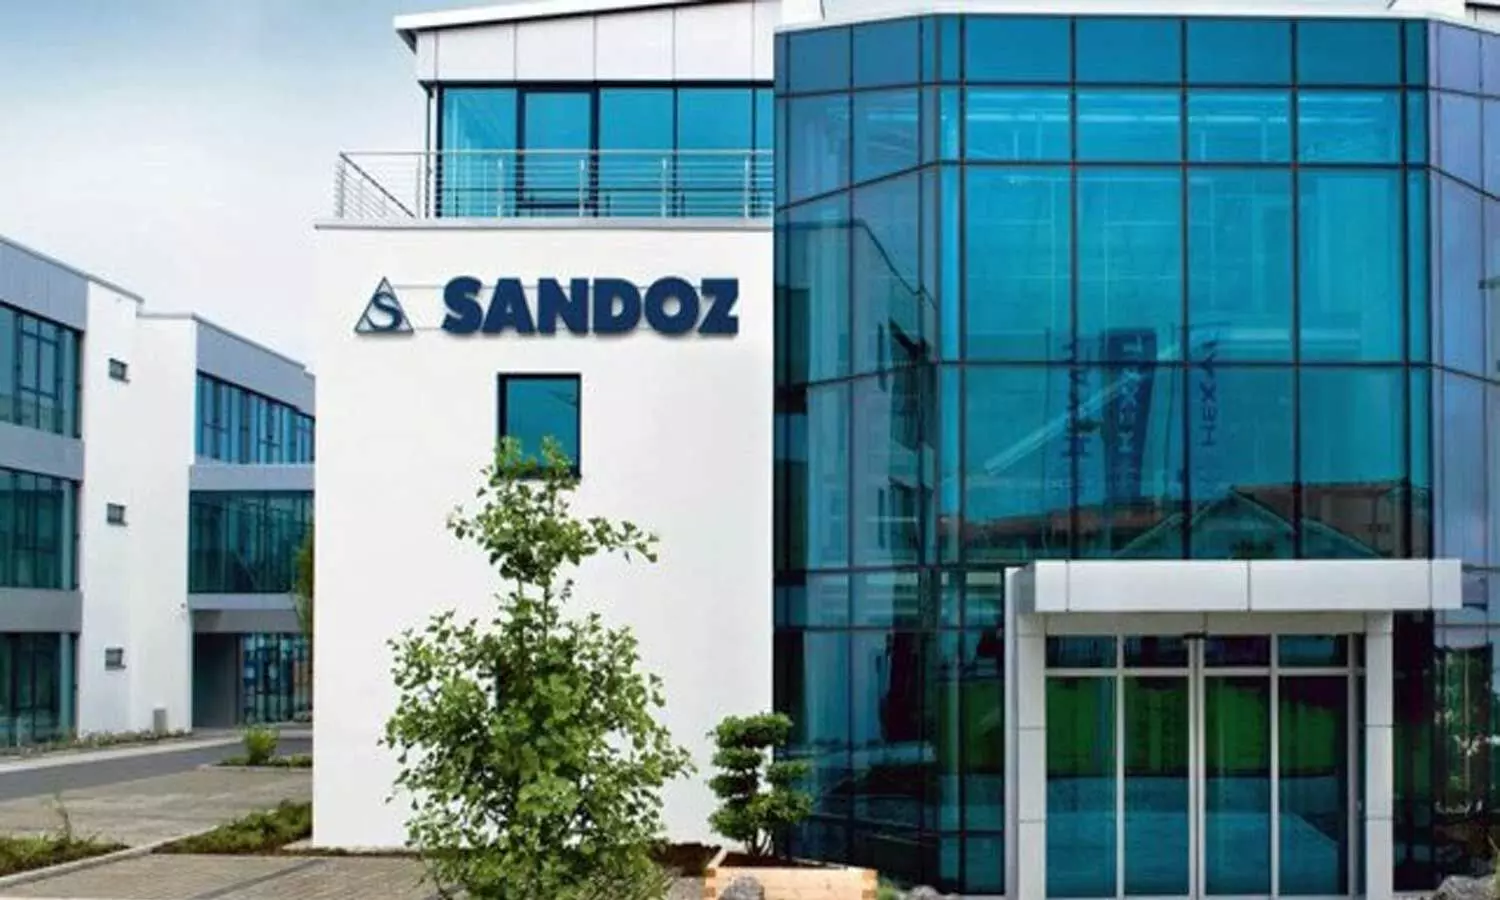 Sandoz to move to new central Basel headquarters after spinoff